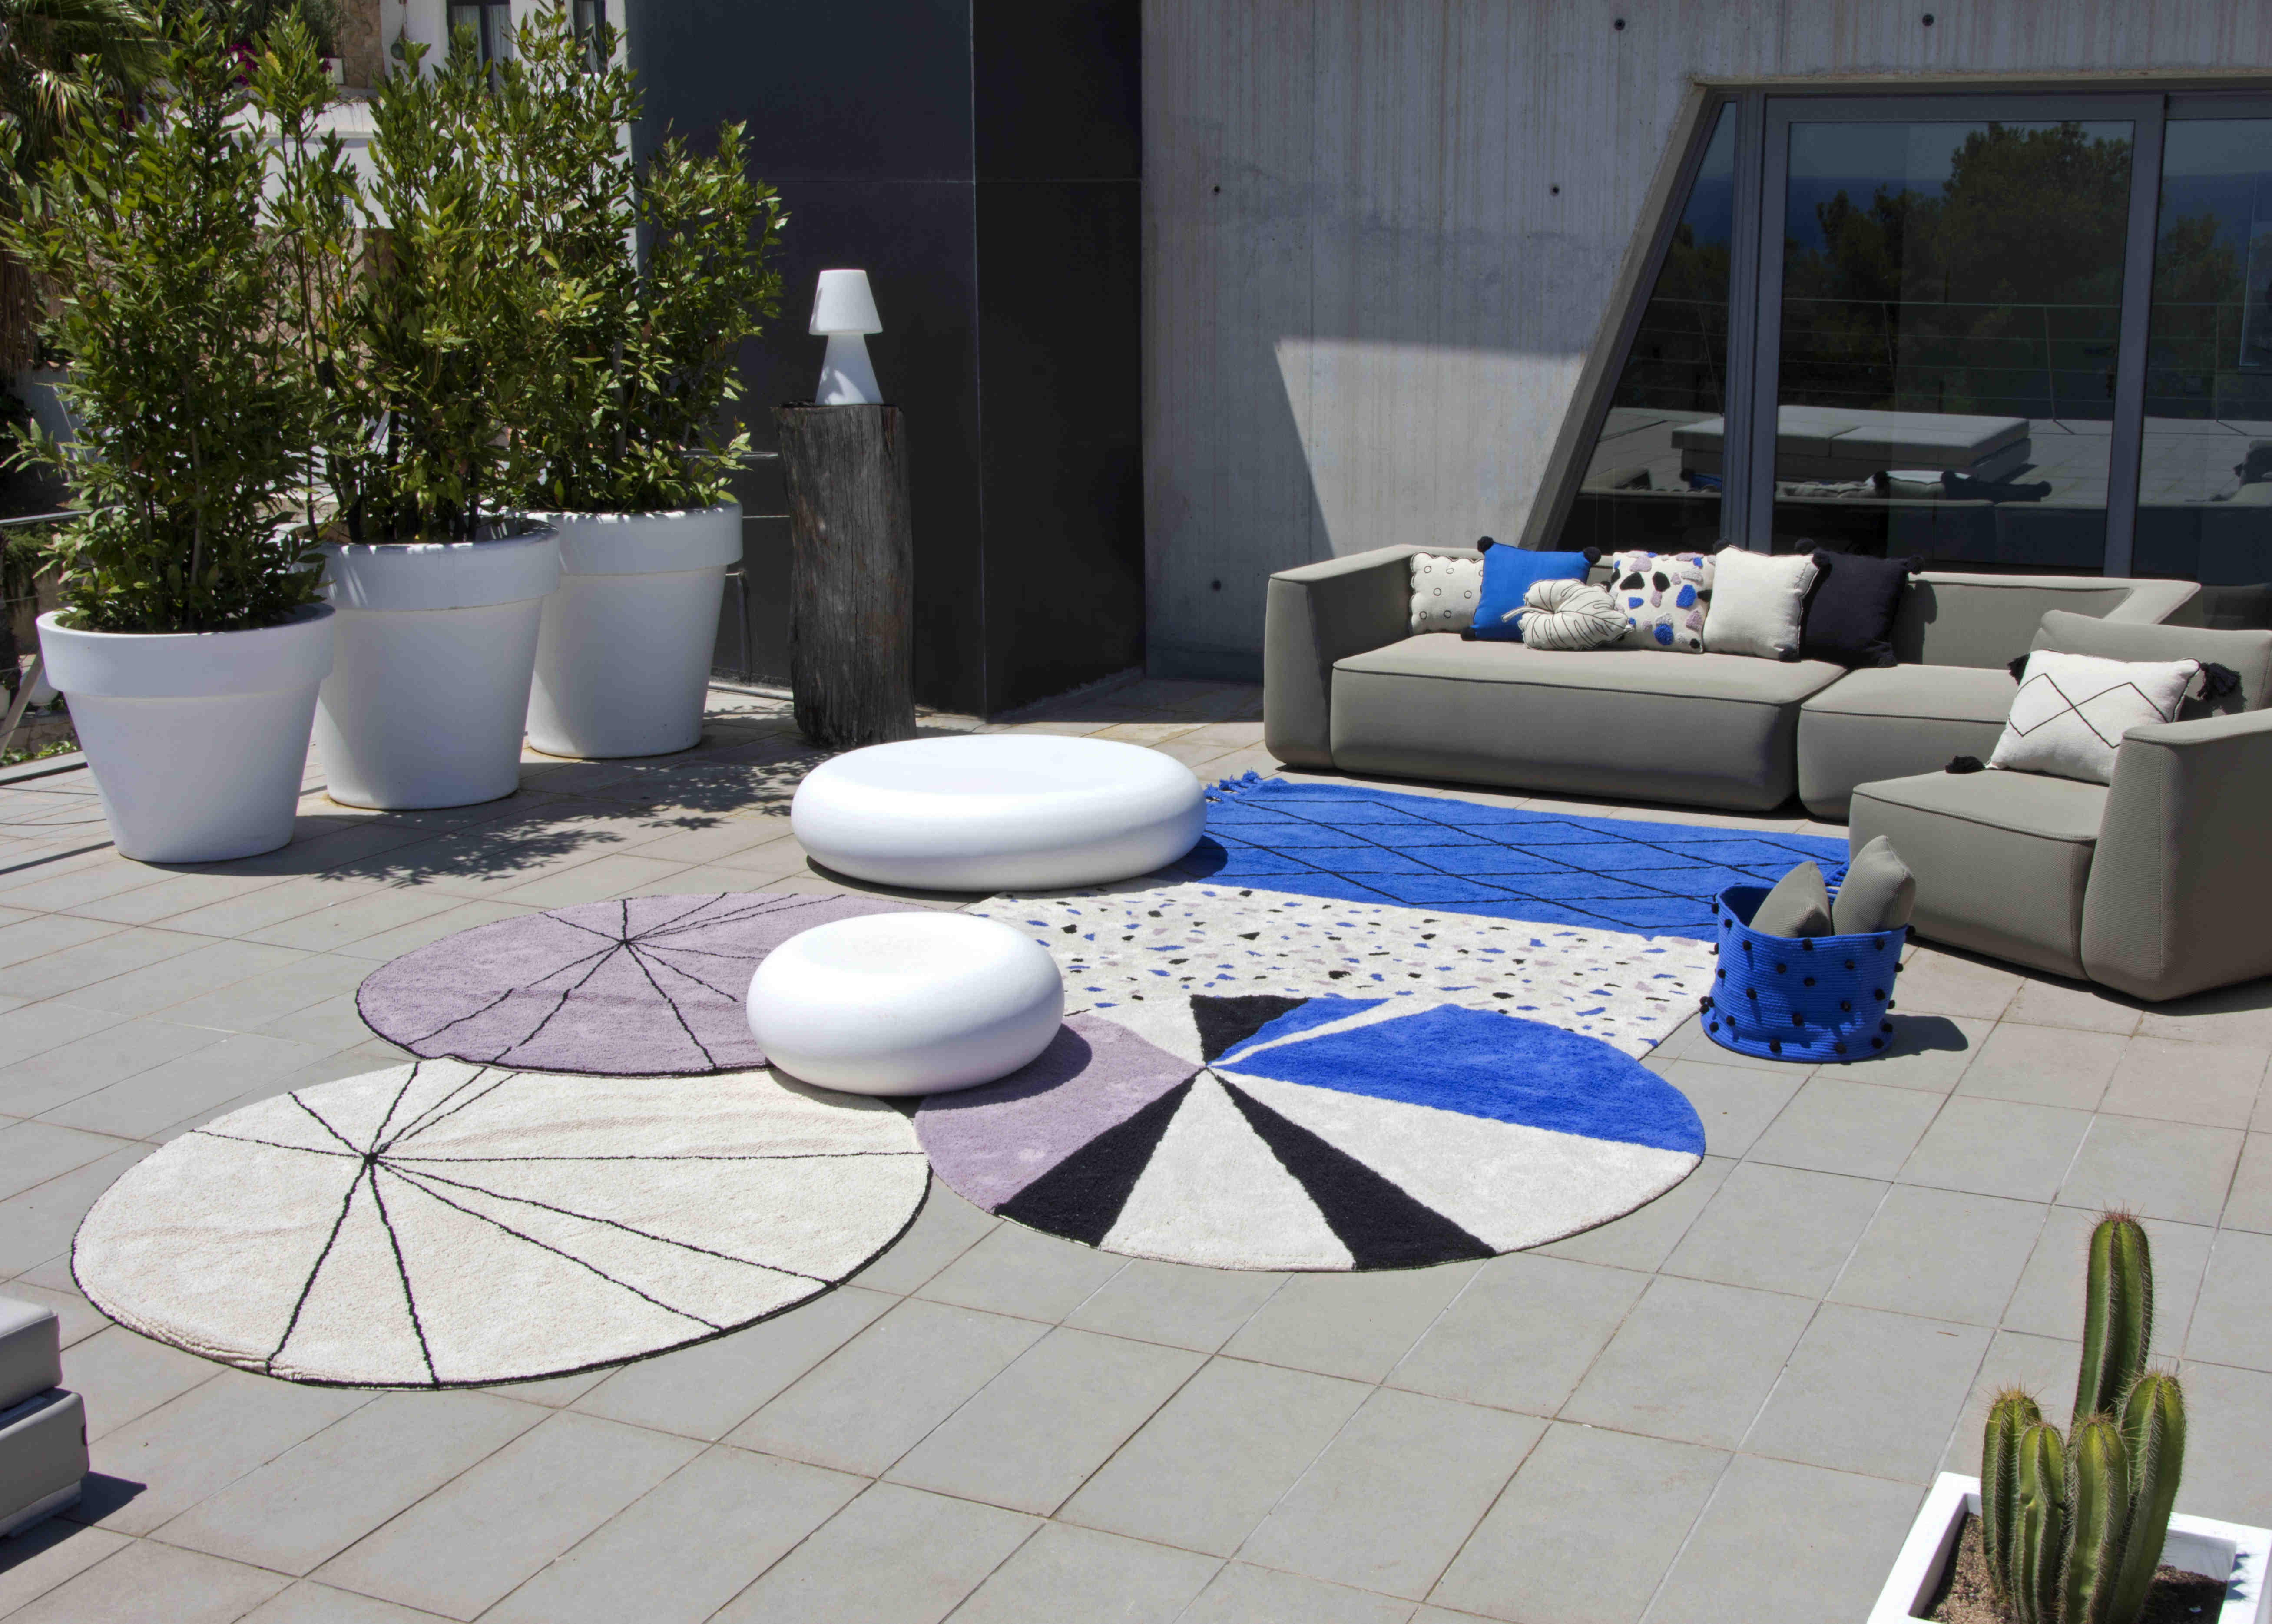 A circular shaped beige cotton rug decorated with geometric black lines